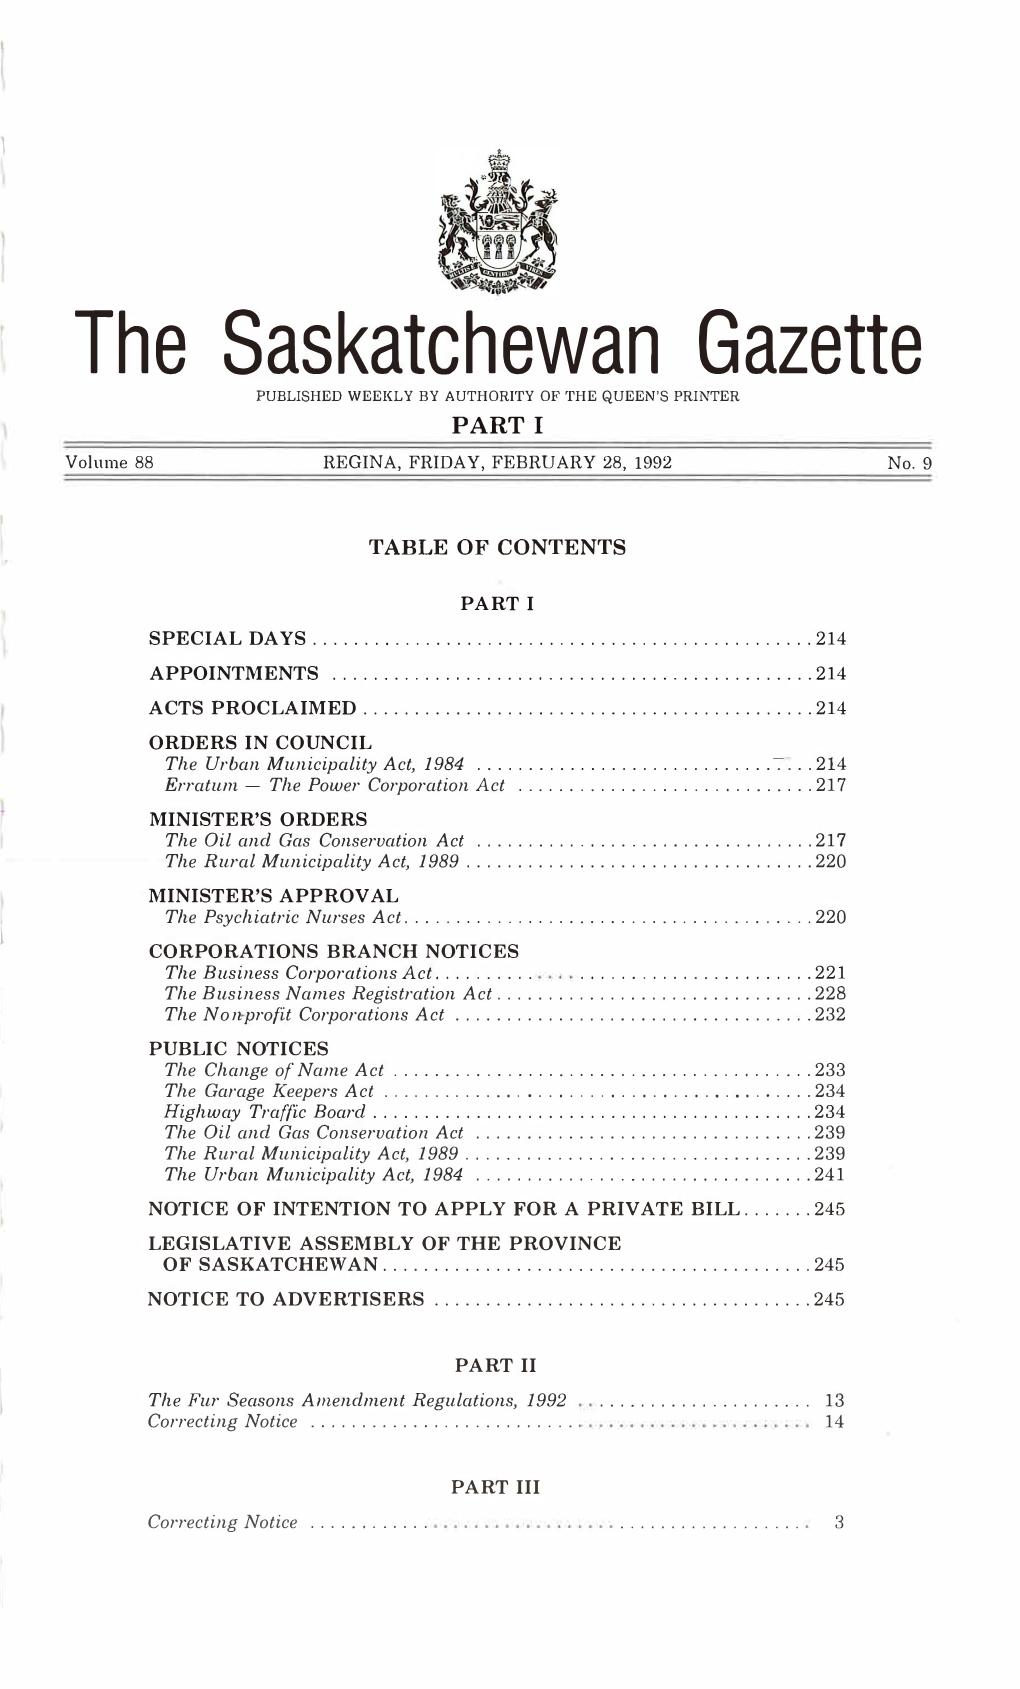 The Saskatchewan Gazette PUBLISHED WEEKLY by AUTHORITY of the QUEEN's PRINTER PART I Volume 88 REGINA, FRIDAY, FEBRUARY 28, 1992 No